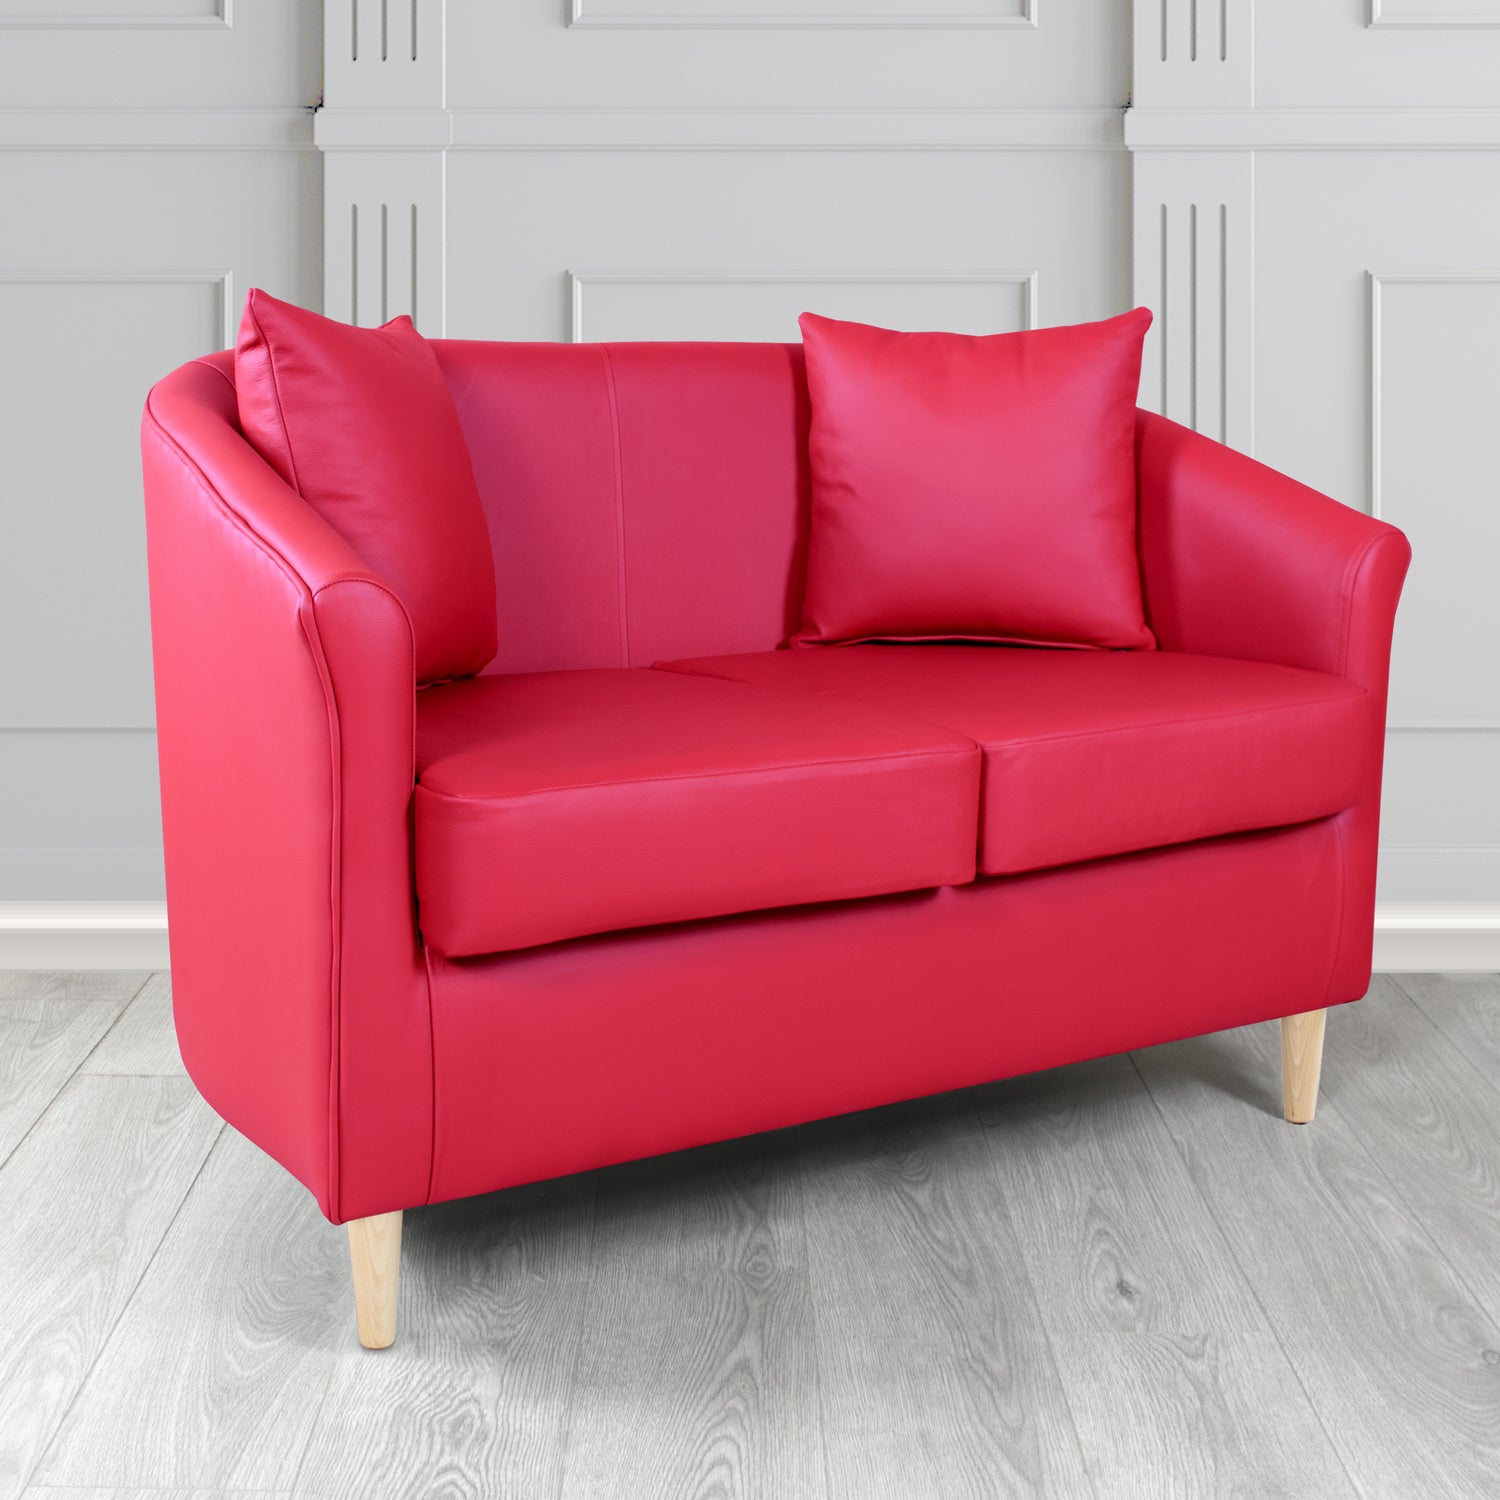 St Tropez Shelly Anemone Crib 5 Genuine Leather 2 Seater Tub Sofa with Scatter Cushions - The Tub Chair Shop